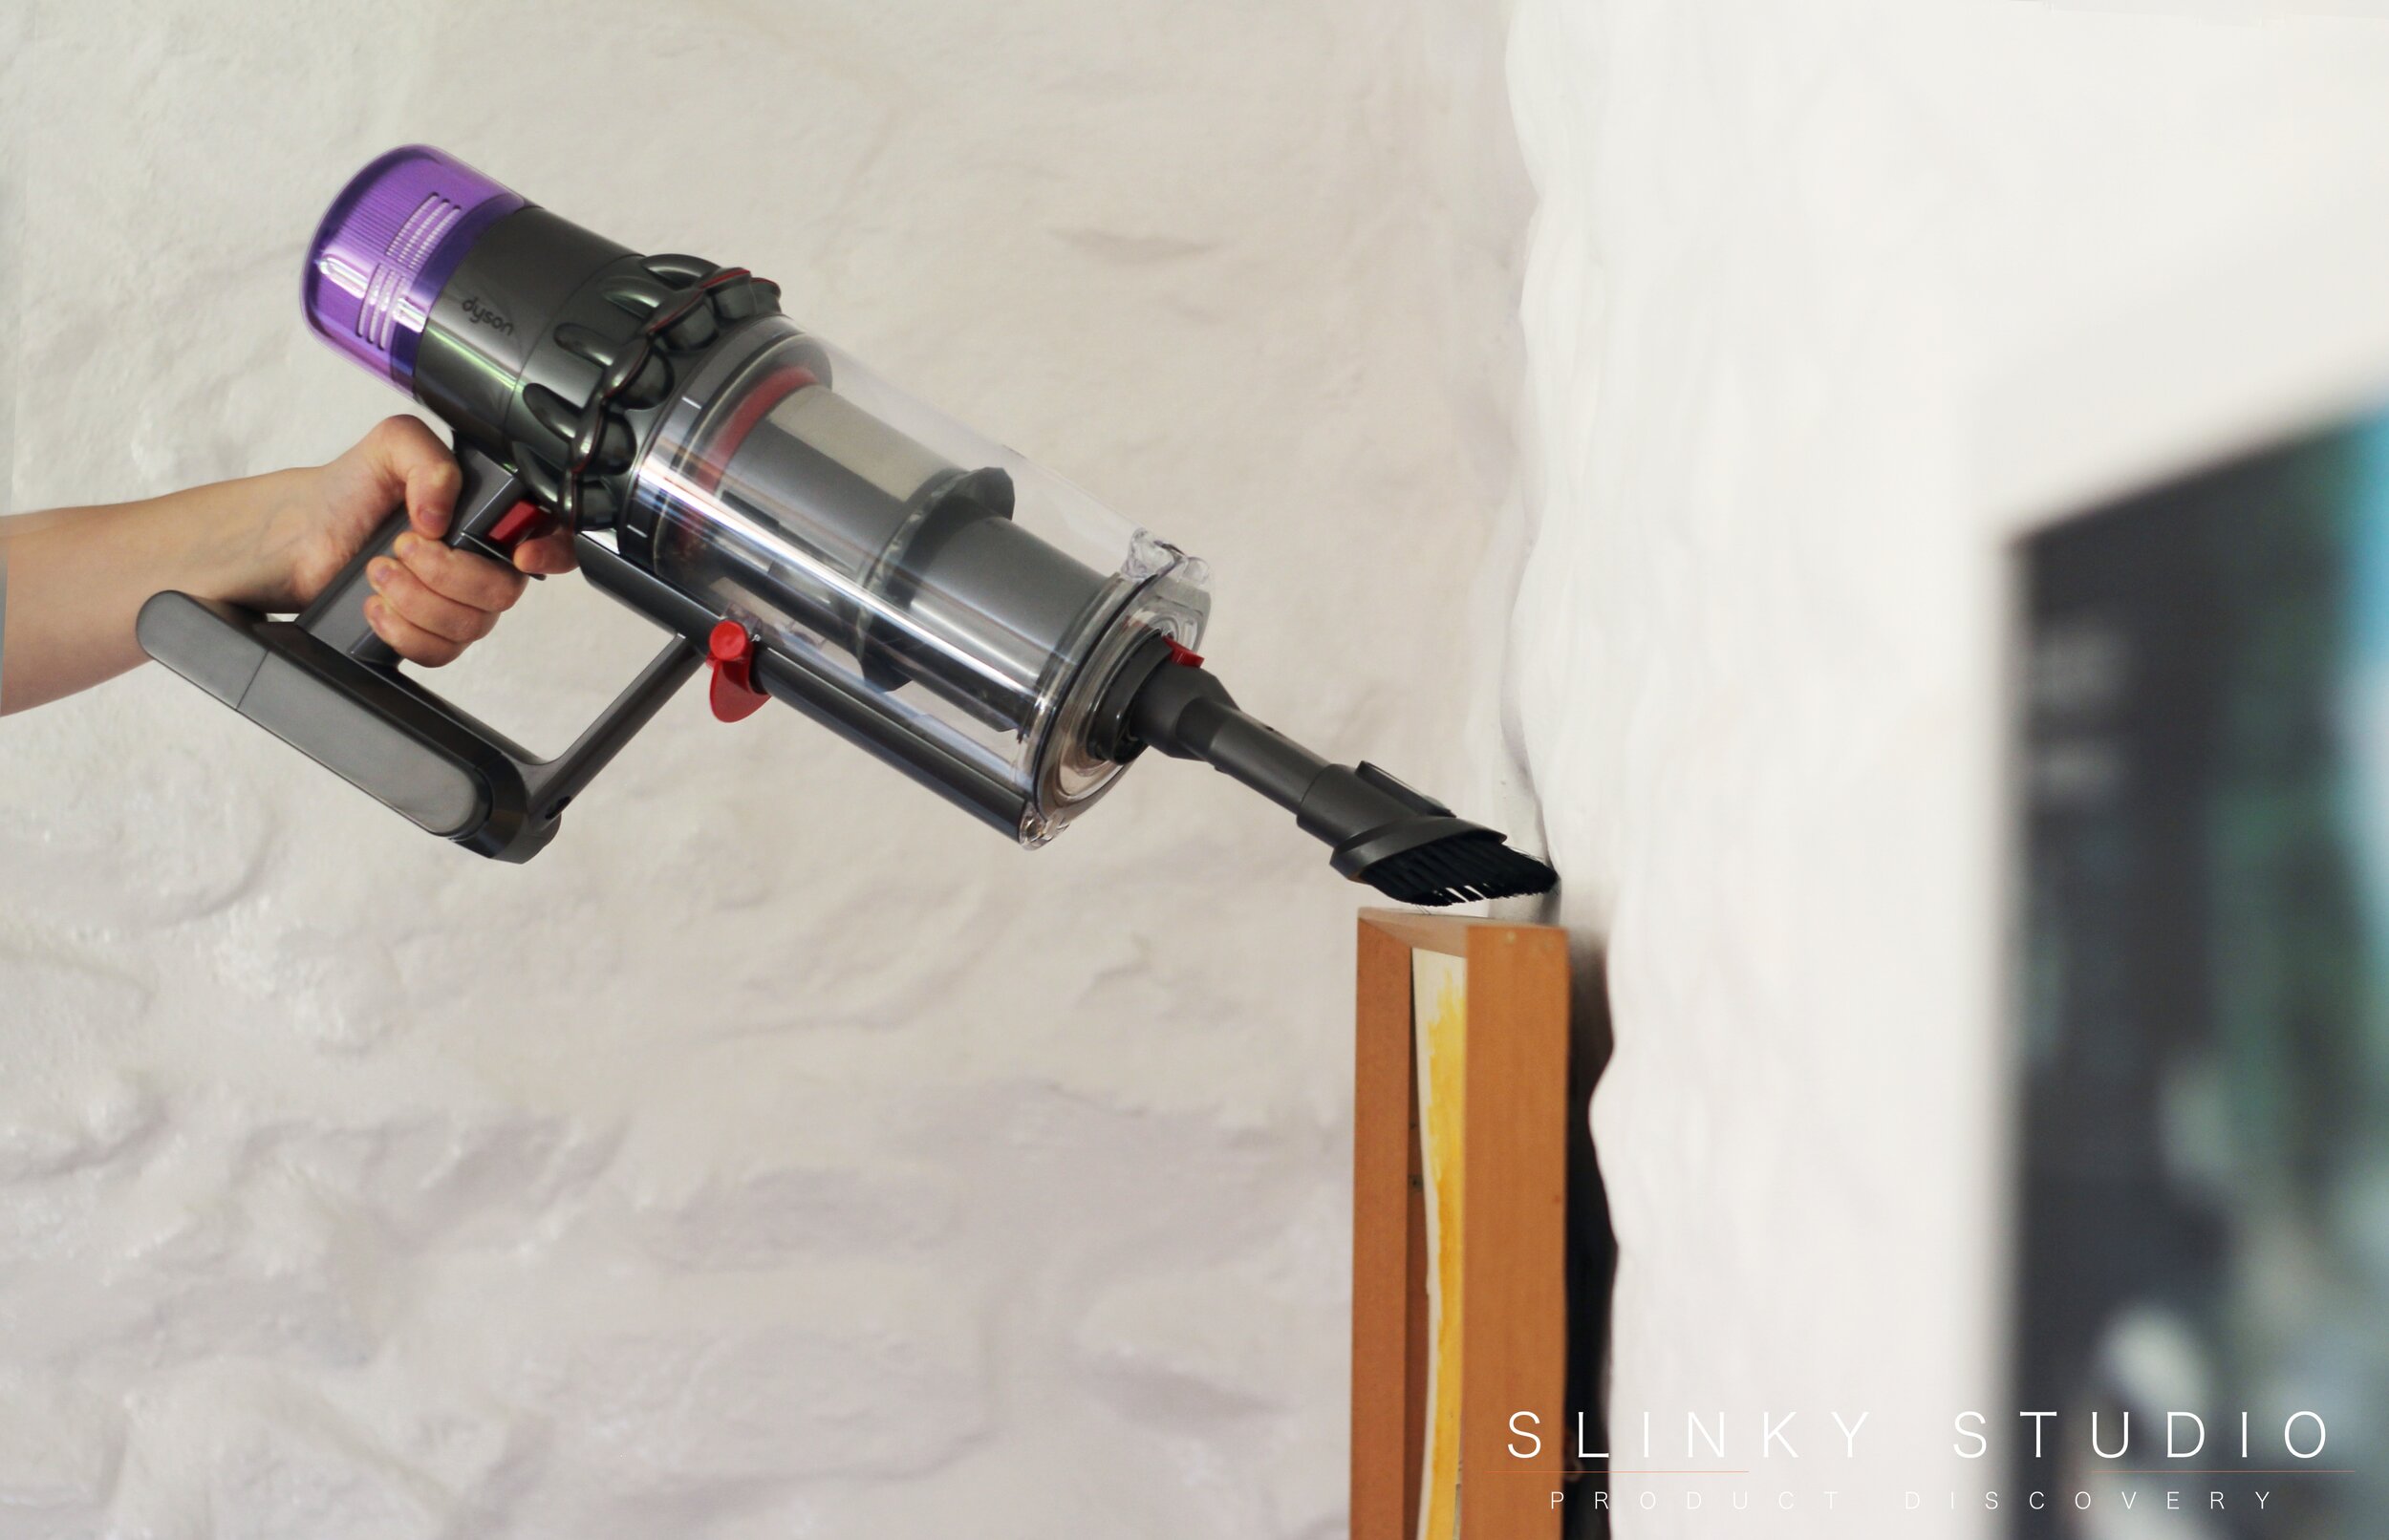 Dyson V11 Absolute Cleaner Side View Dusting Painting.jpg